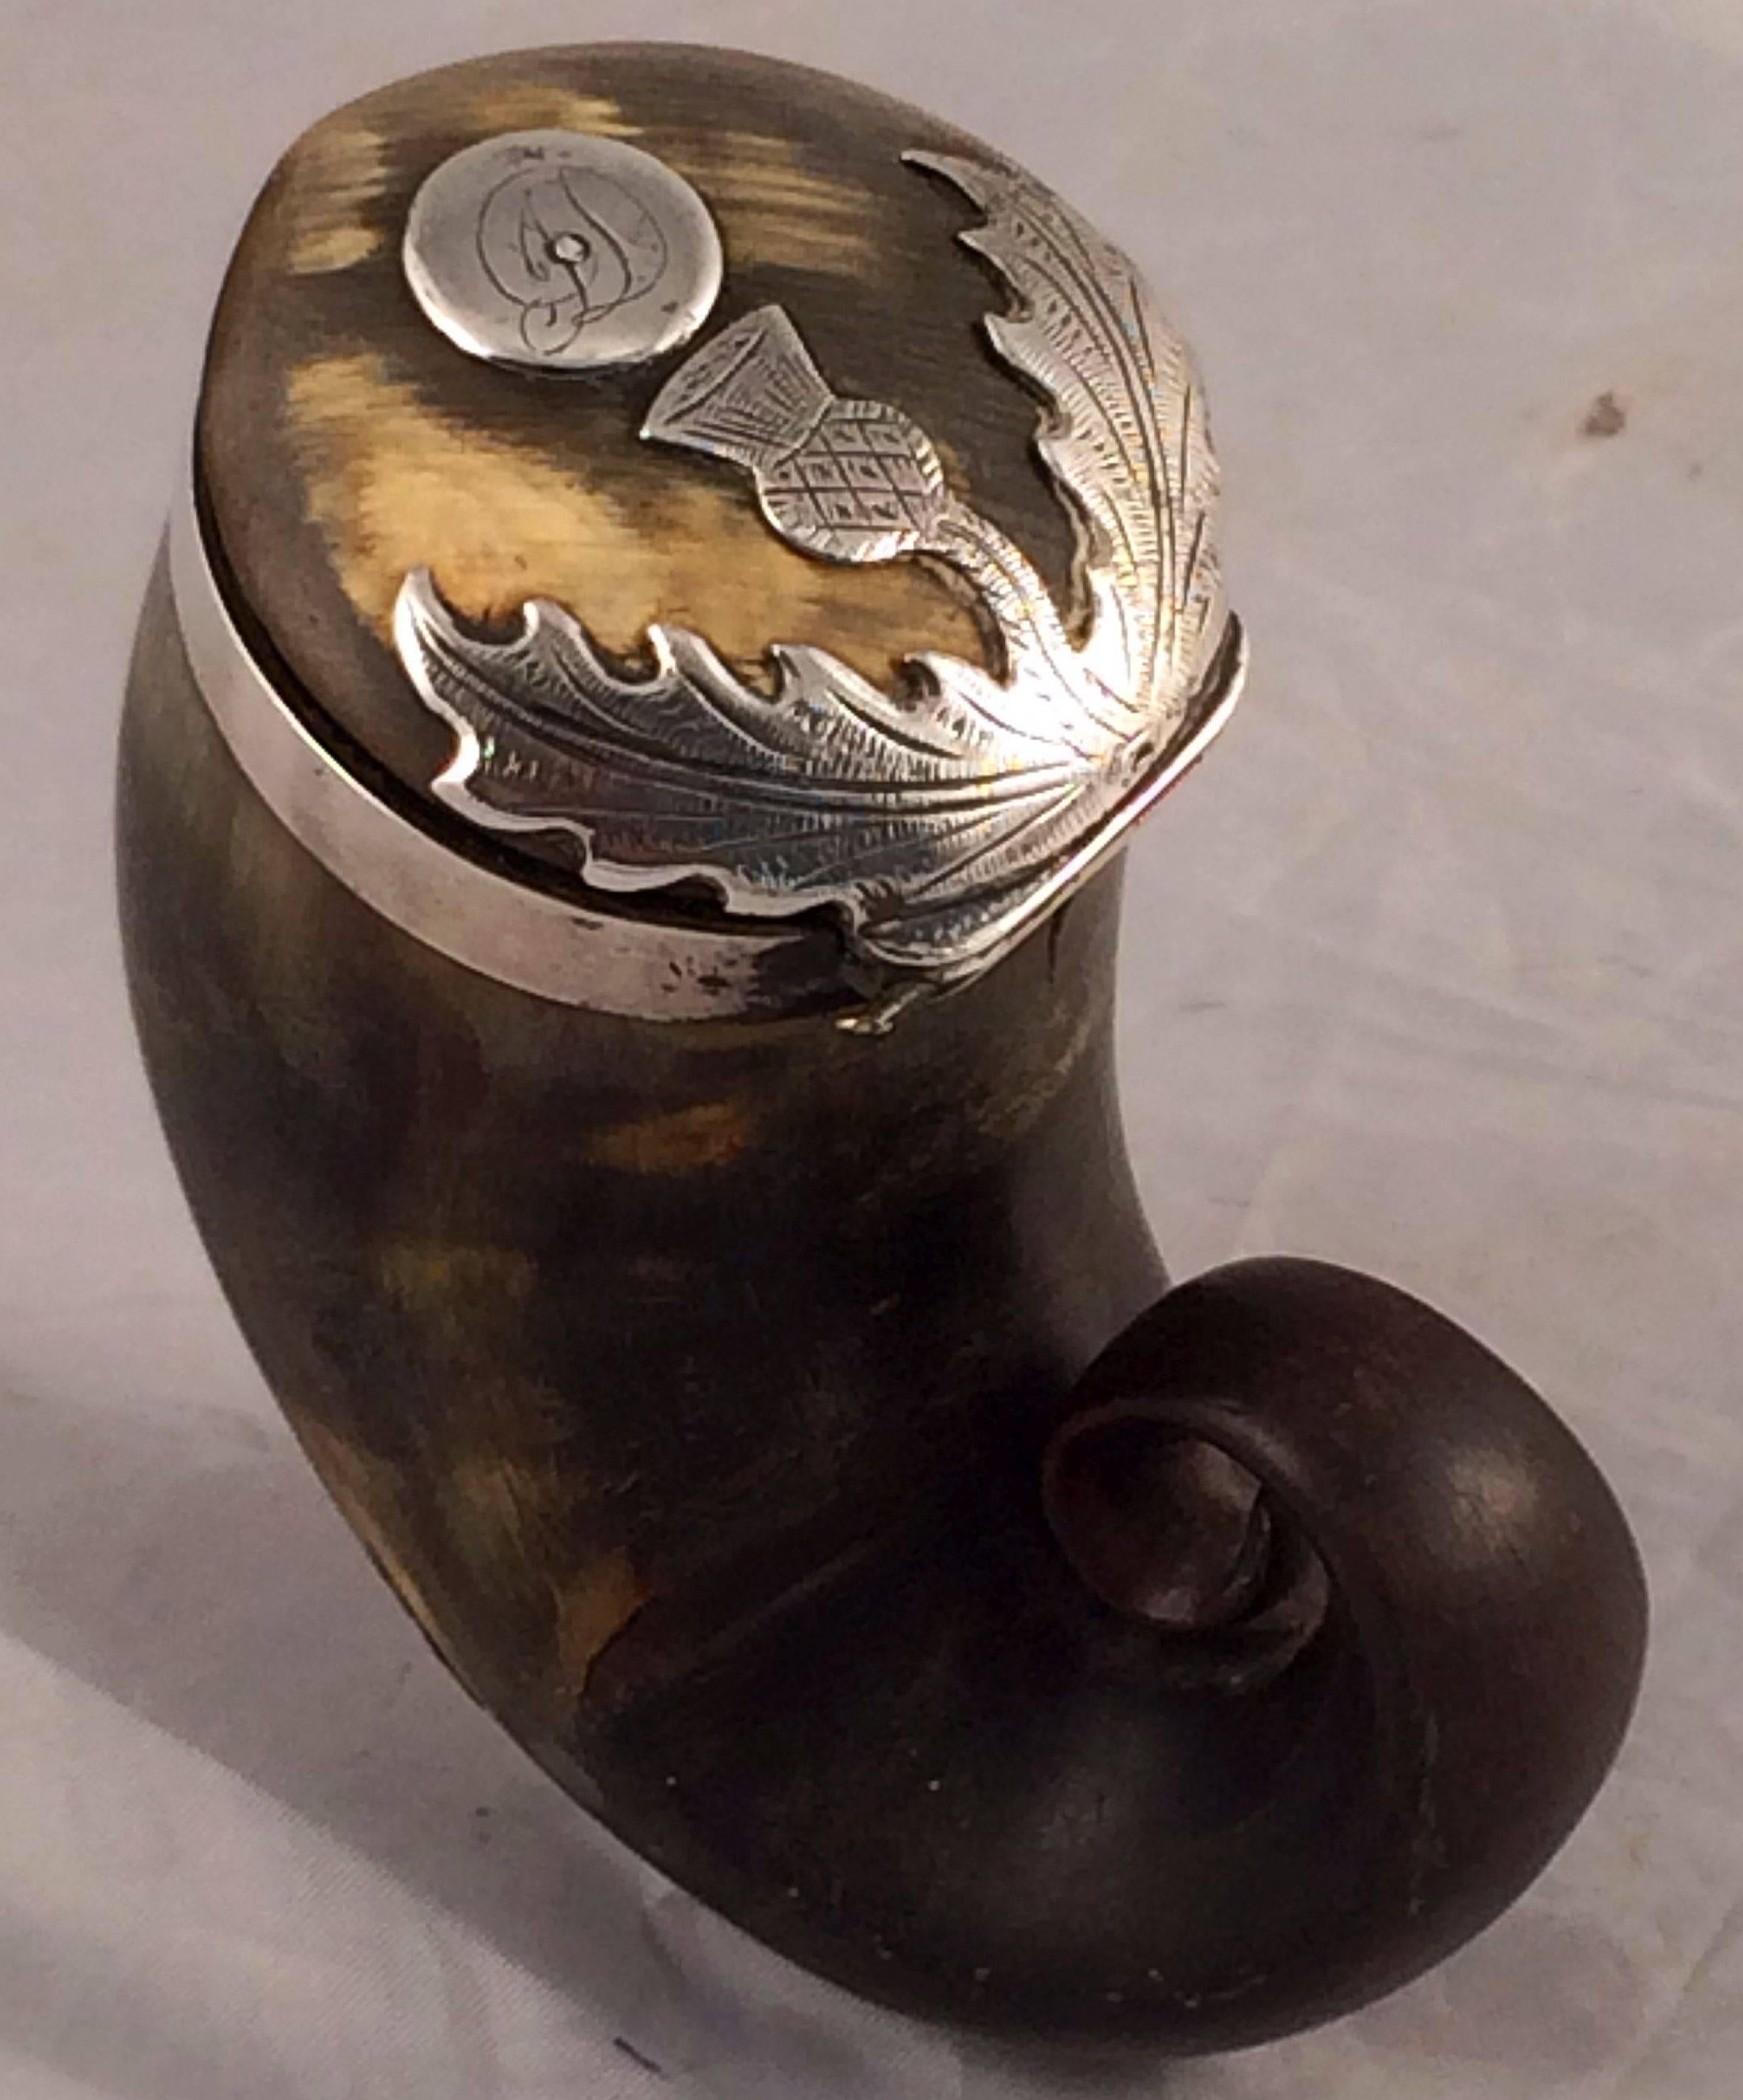 A handsome Scottish silver-mounted horn mull for snuff tobacco from the Georgian era, circa 1800, featuring an etched silver thistle (a symbol for Scotland) decorating the hinged lid.

Measuring: 3 1/4